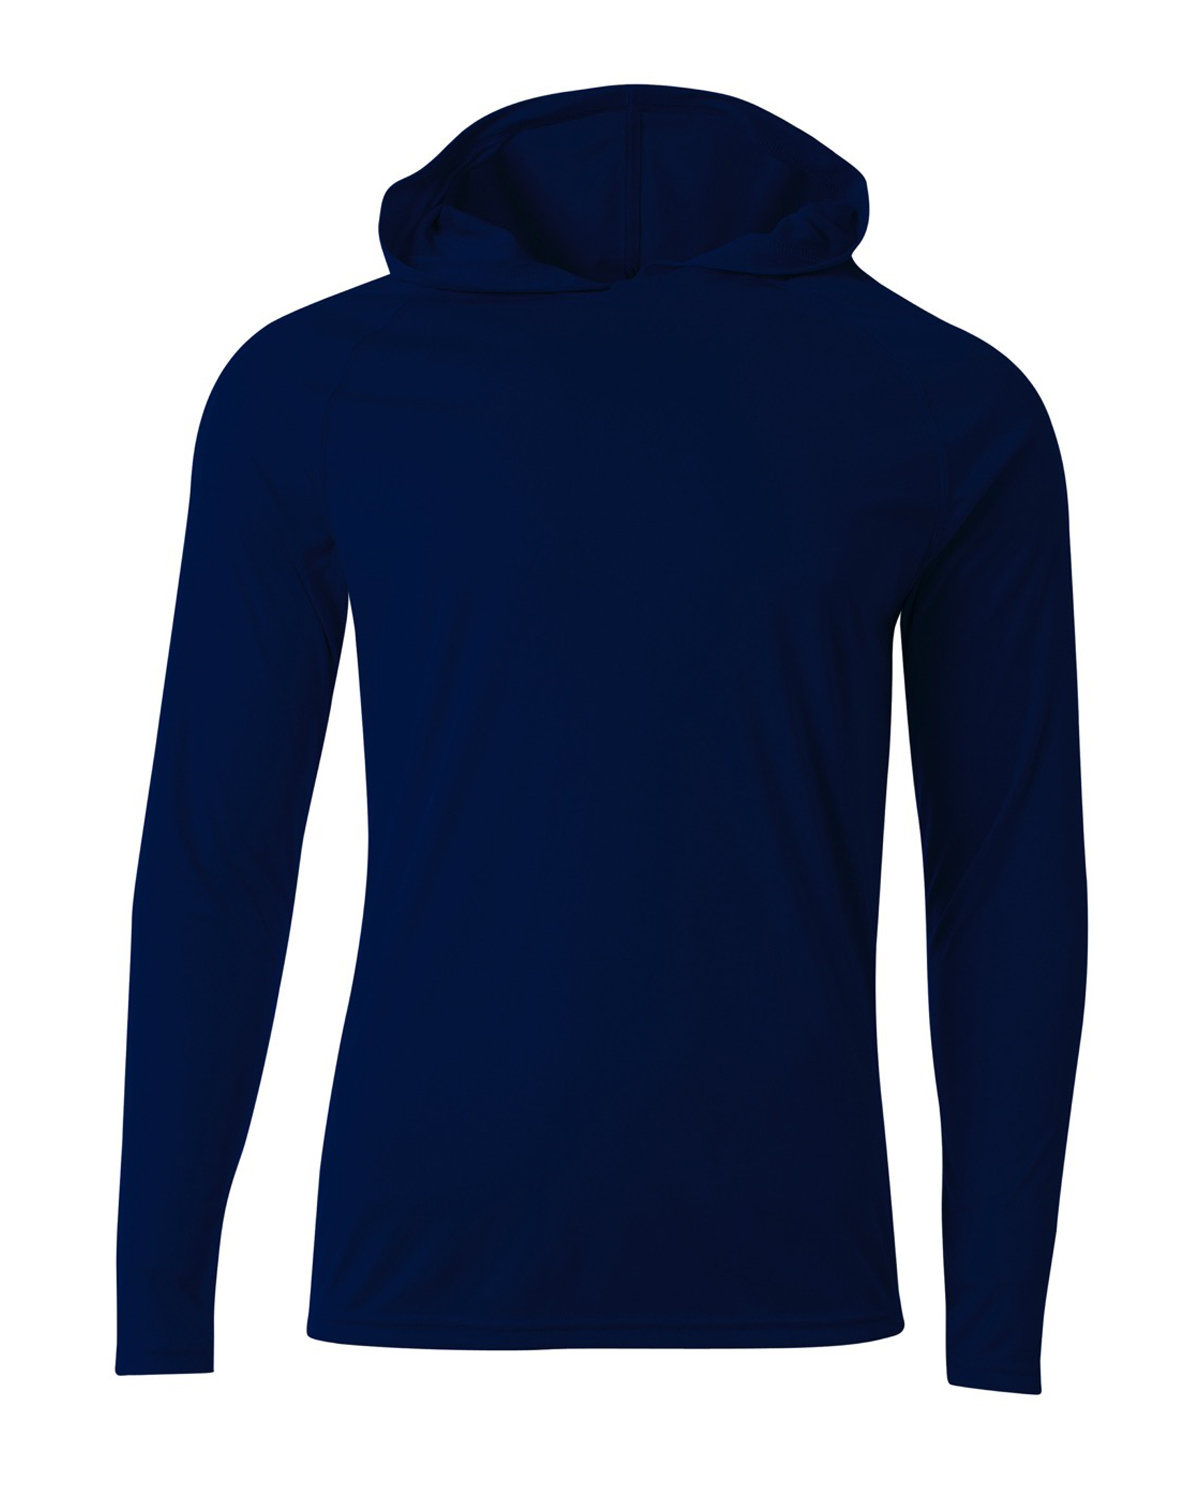 A4 Youth Long Sleeve Hooded T-Shirt | alphabroder